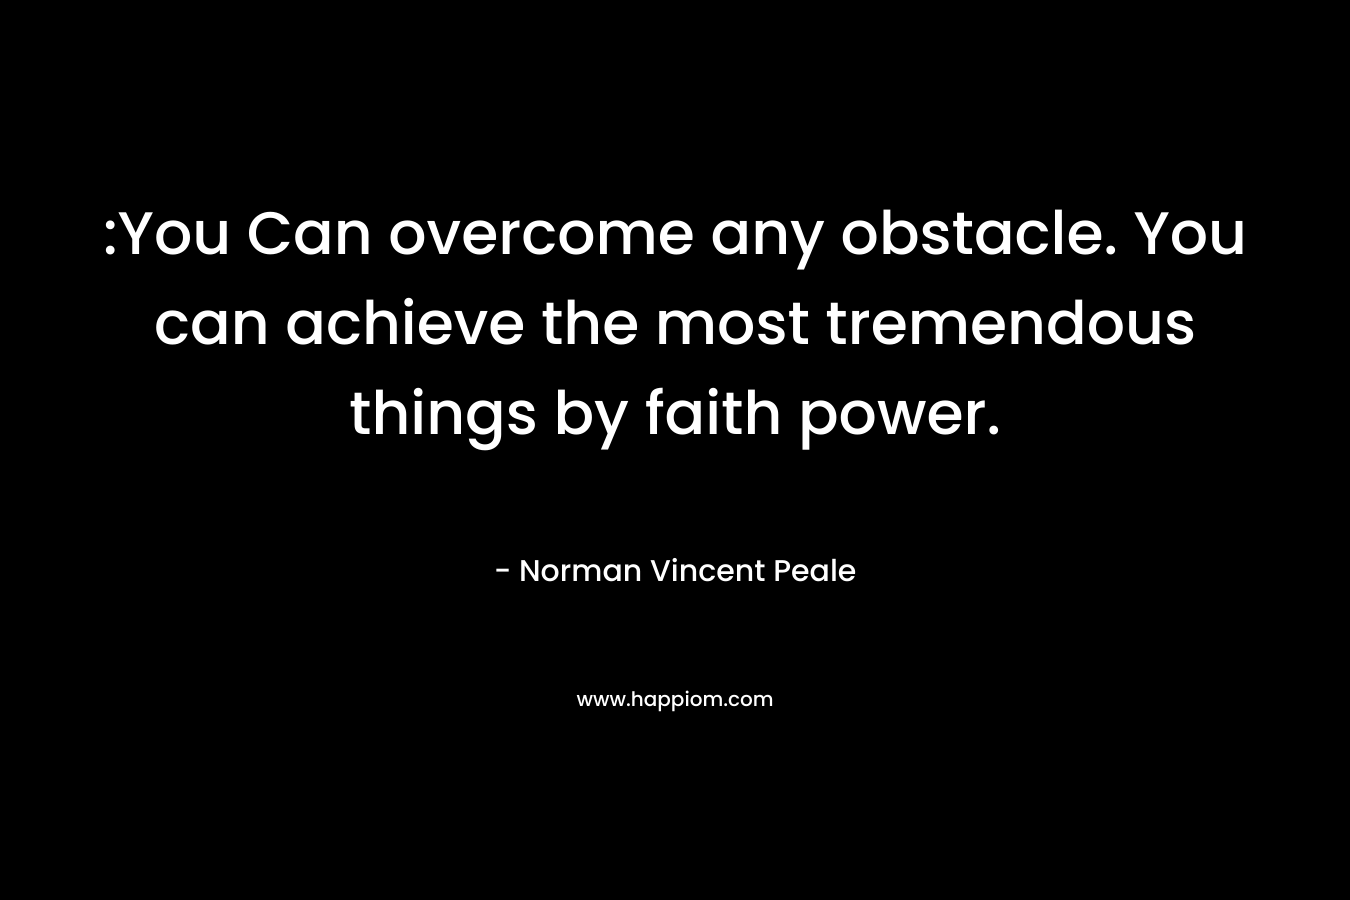 :You Can overcome any obstacle. You can achieve the most tremendous things by faith power. – Norman Vincent Peale